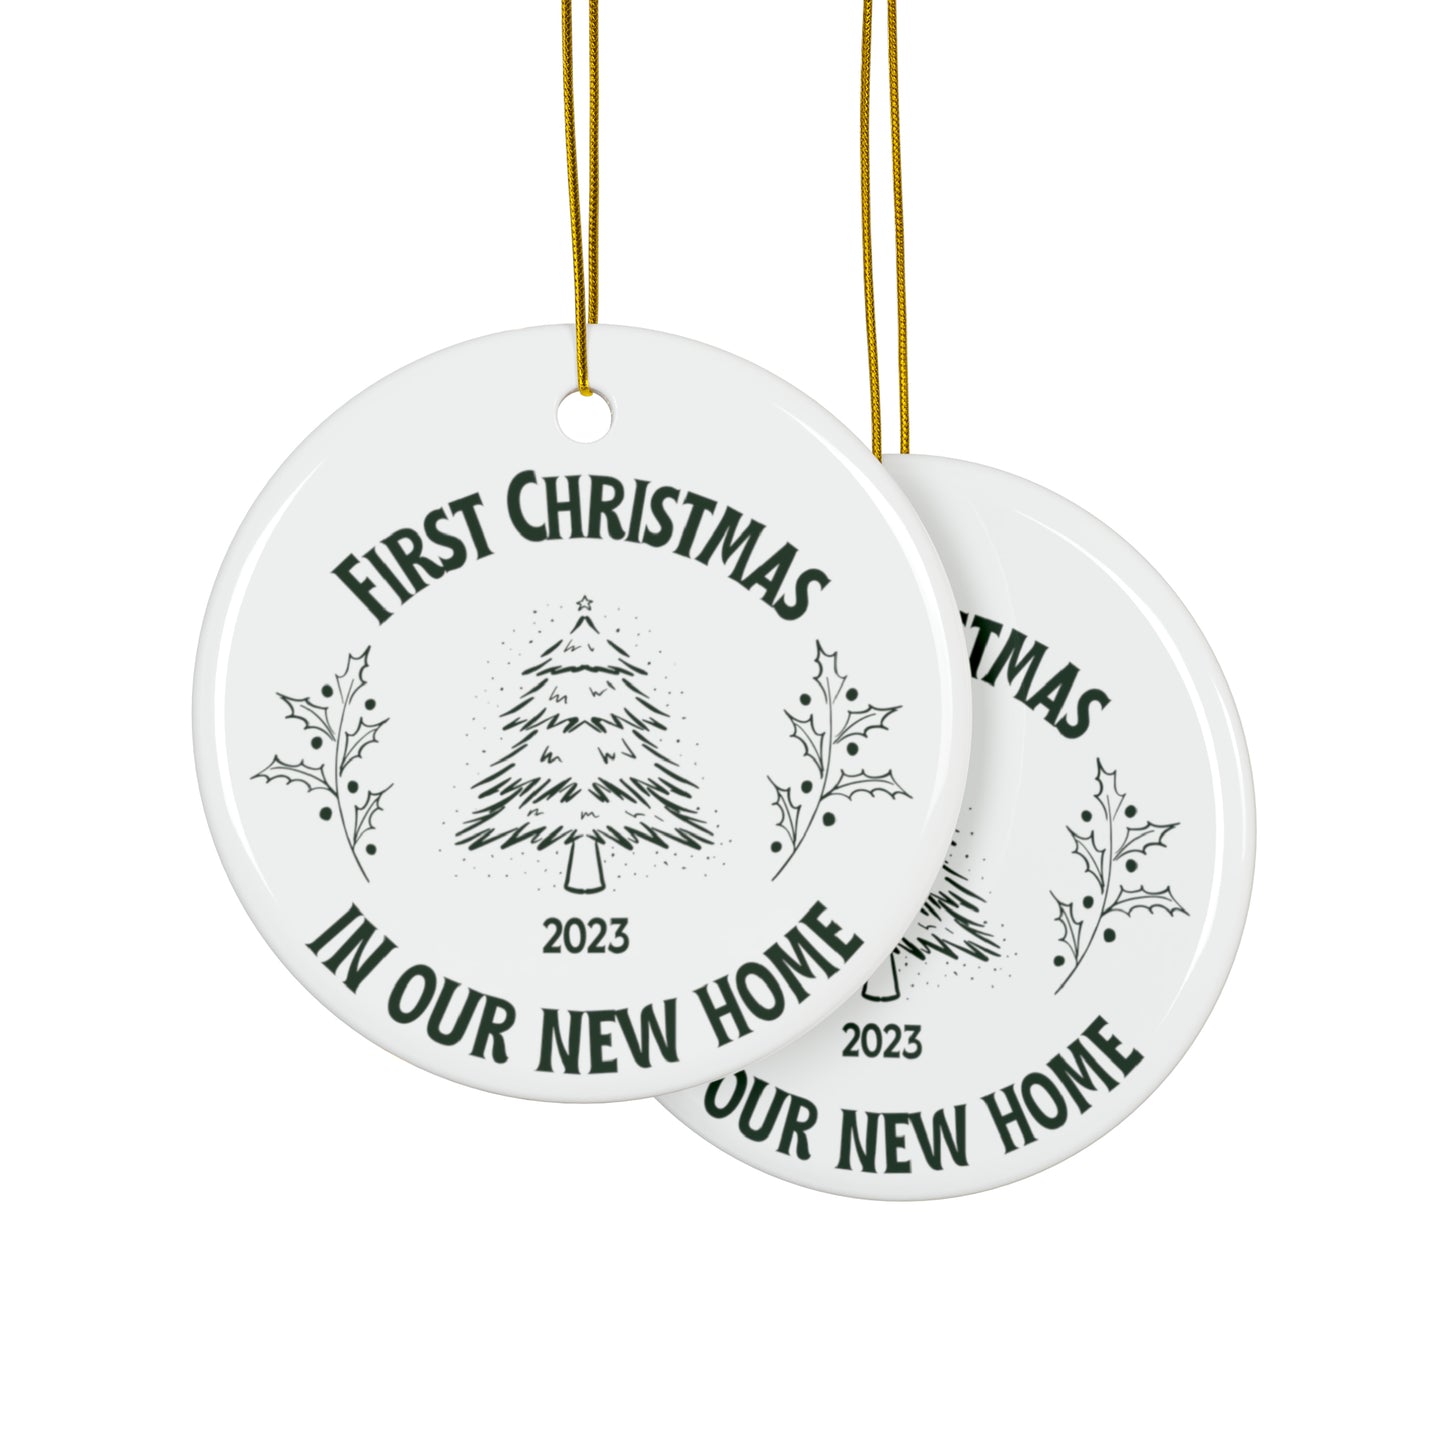 First Christmas in Our New Home Ceramic Ornament | Christmas Decoration | First Christmas in New Home 2023